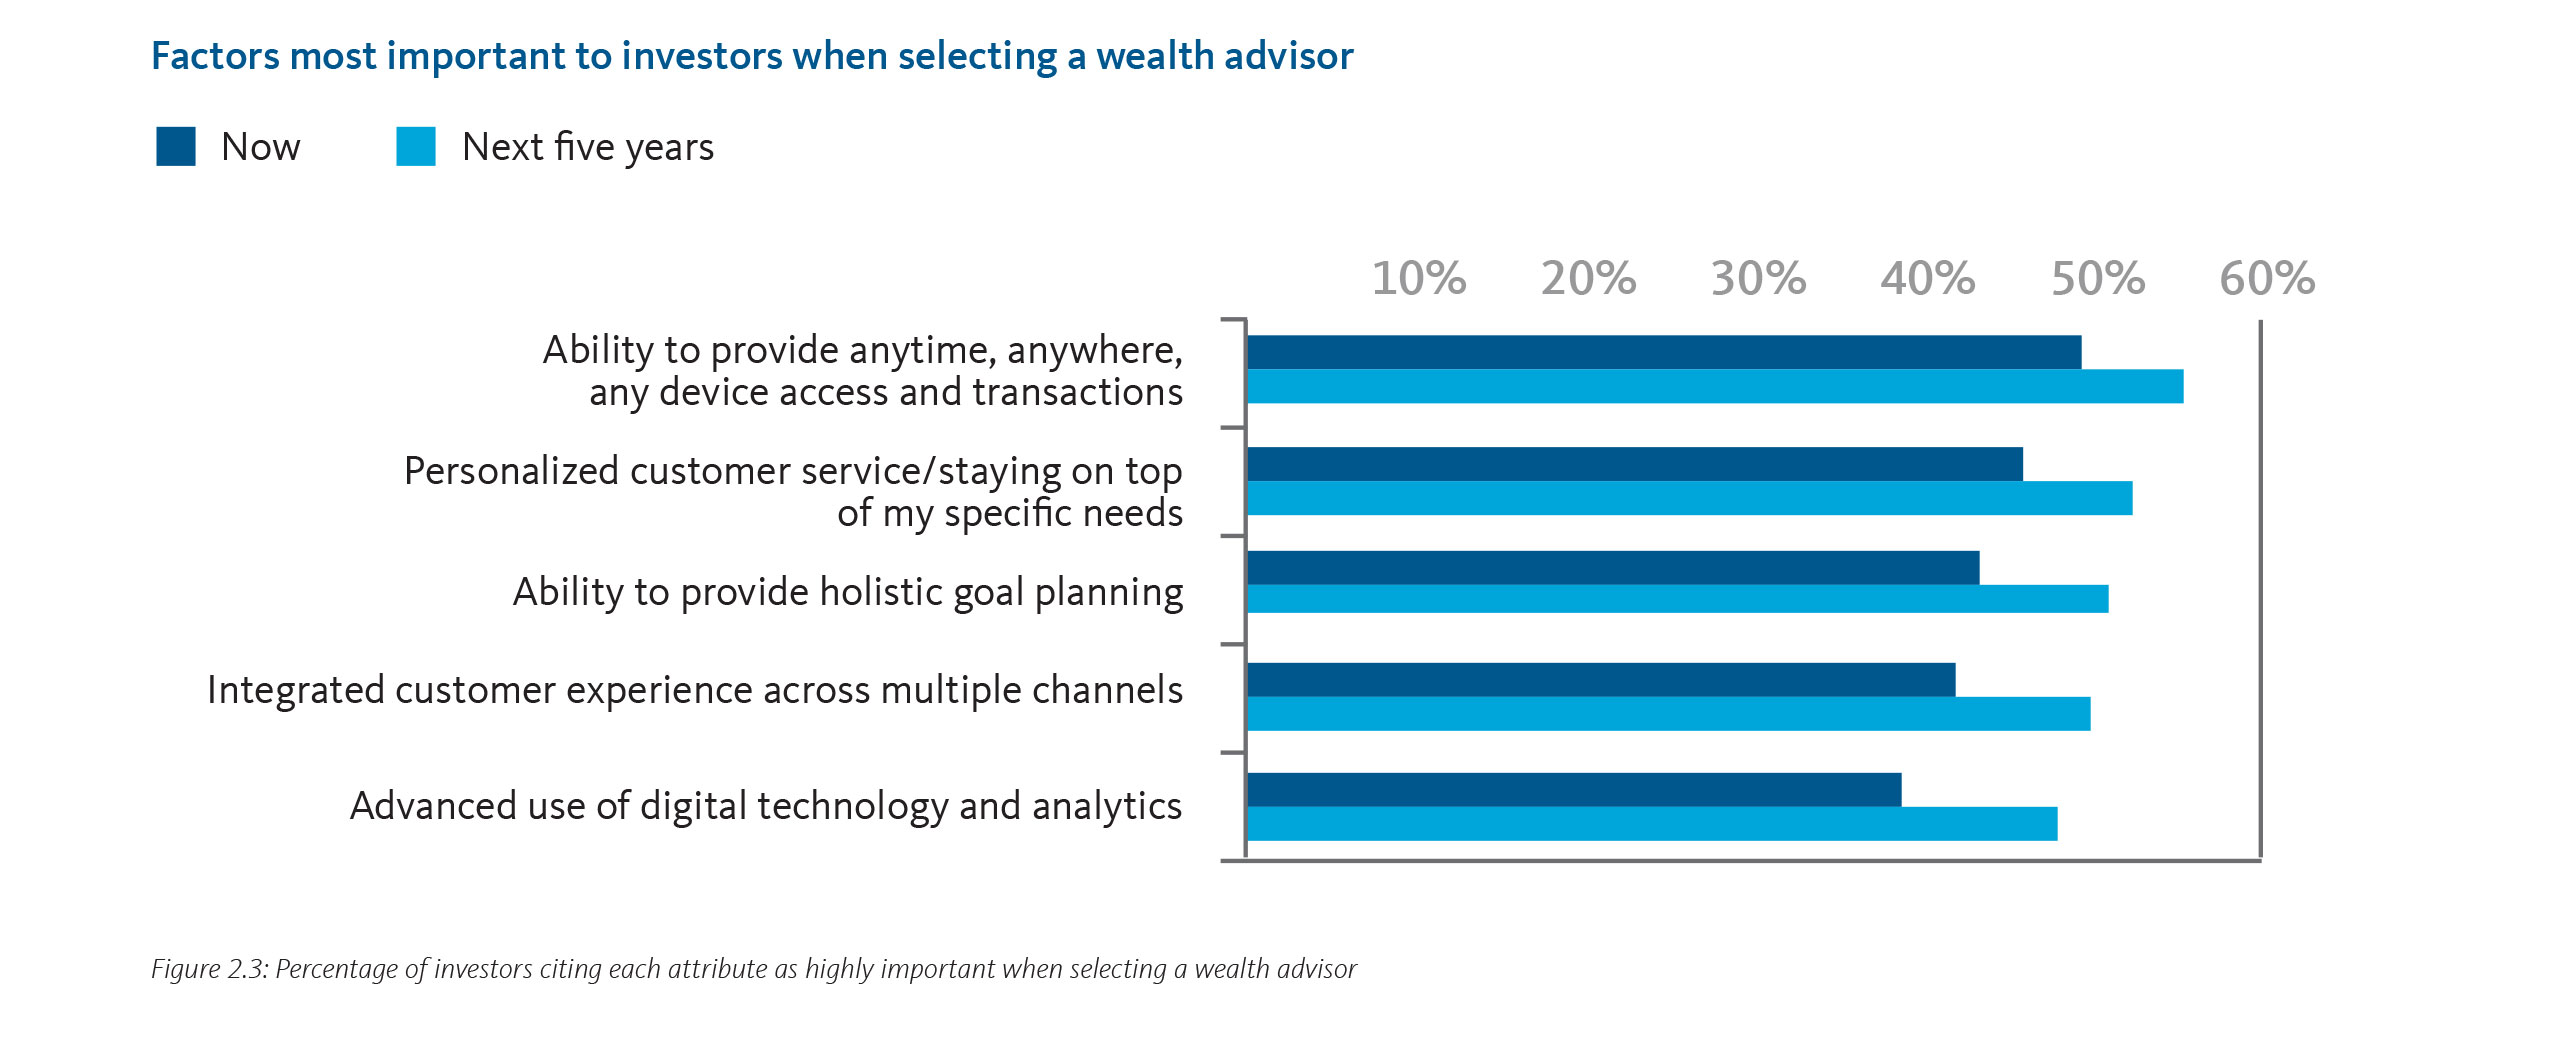 Factors most important to investors when selecting a wealth advisor